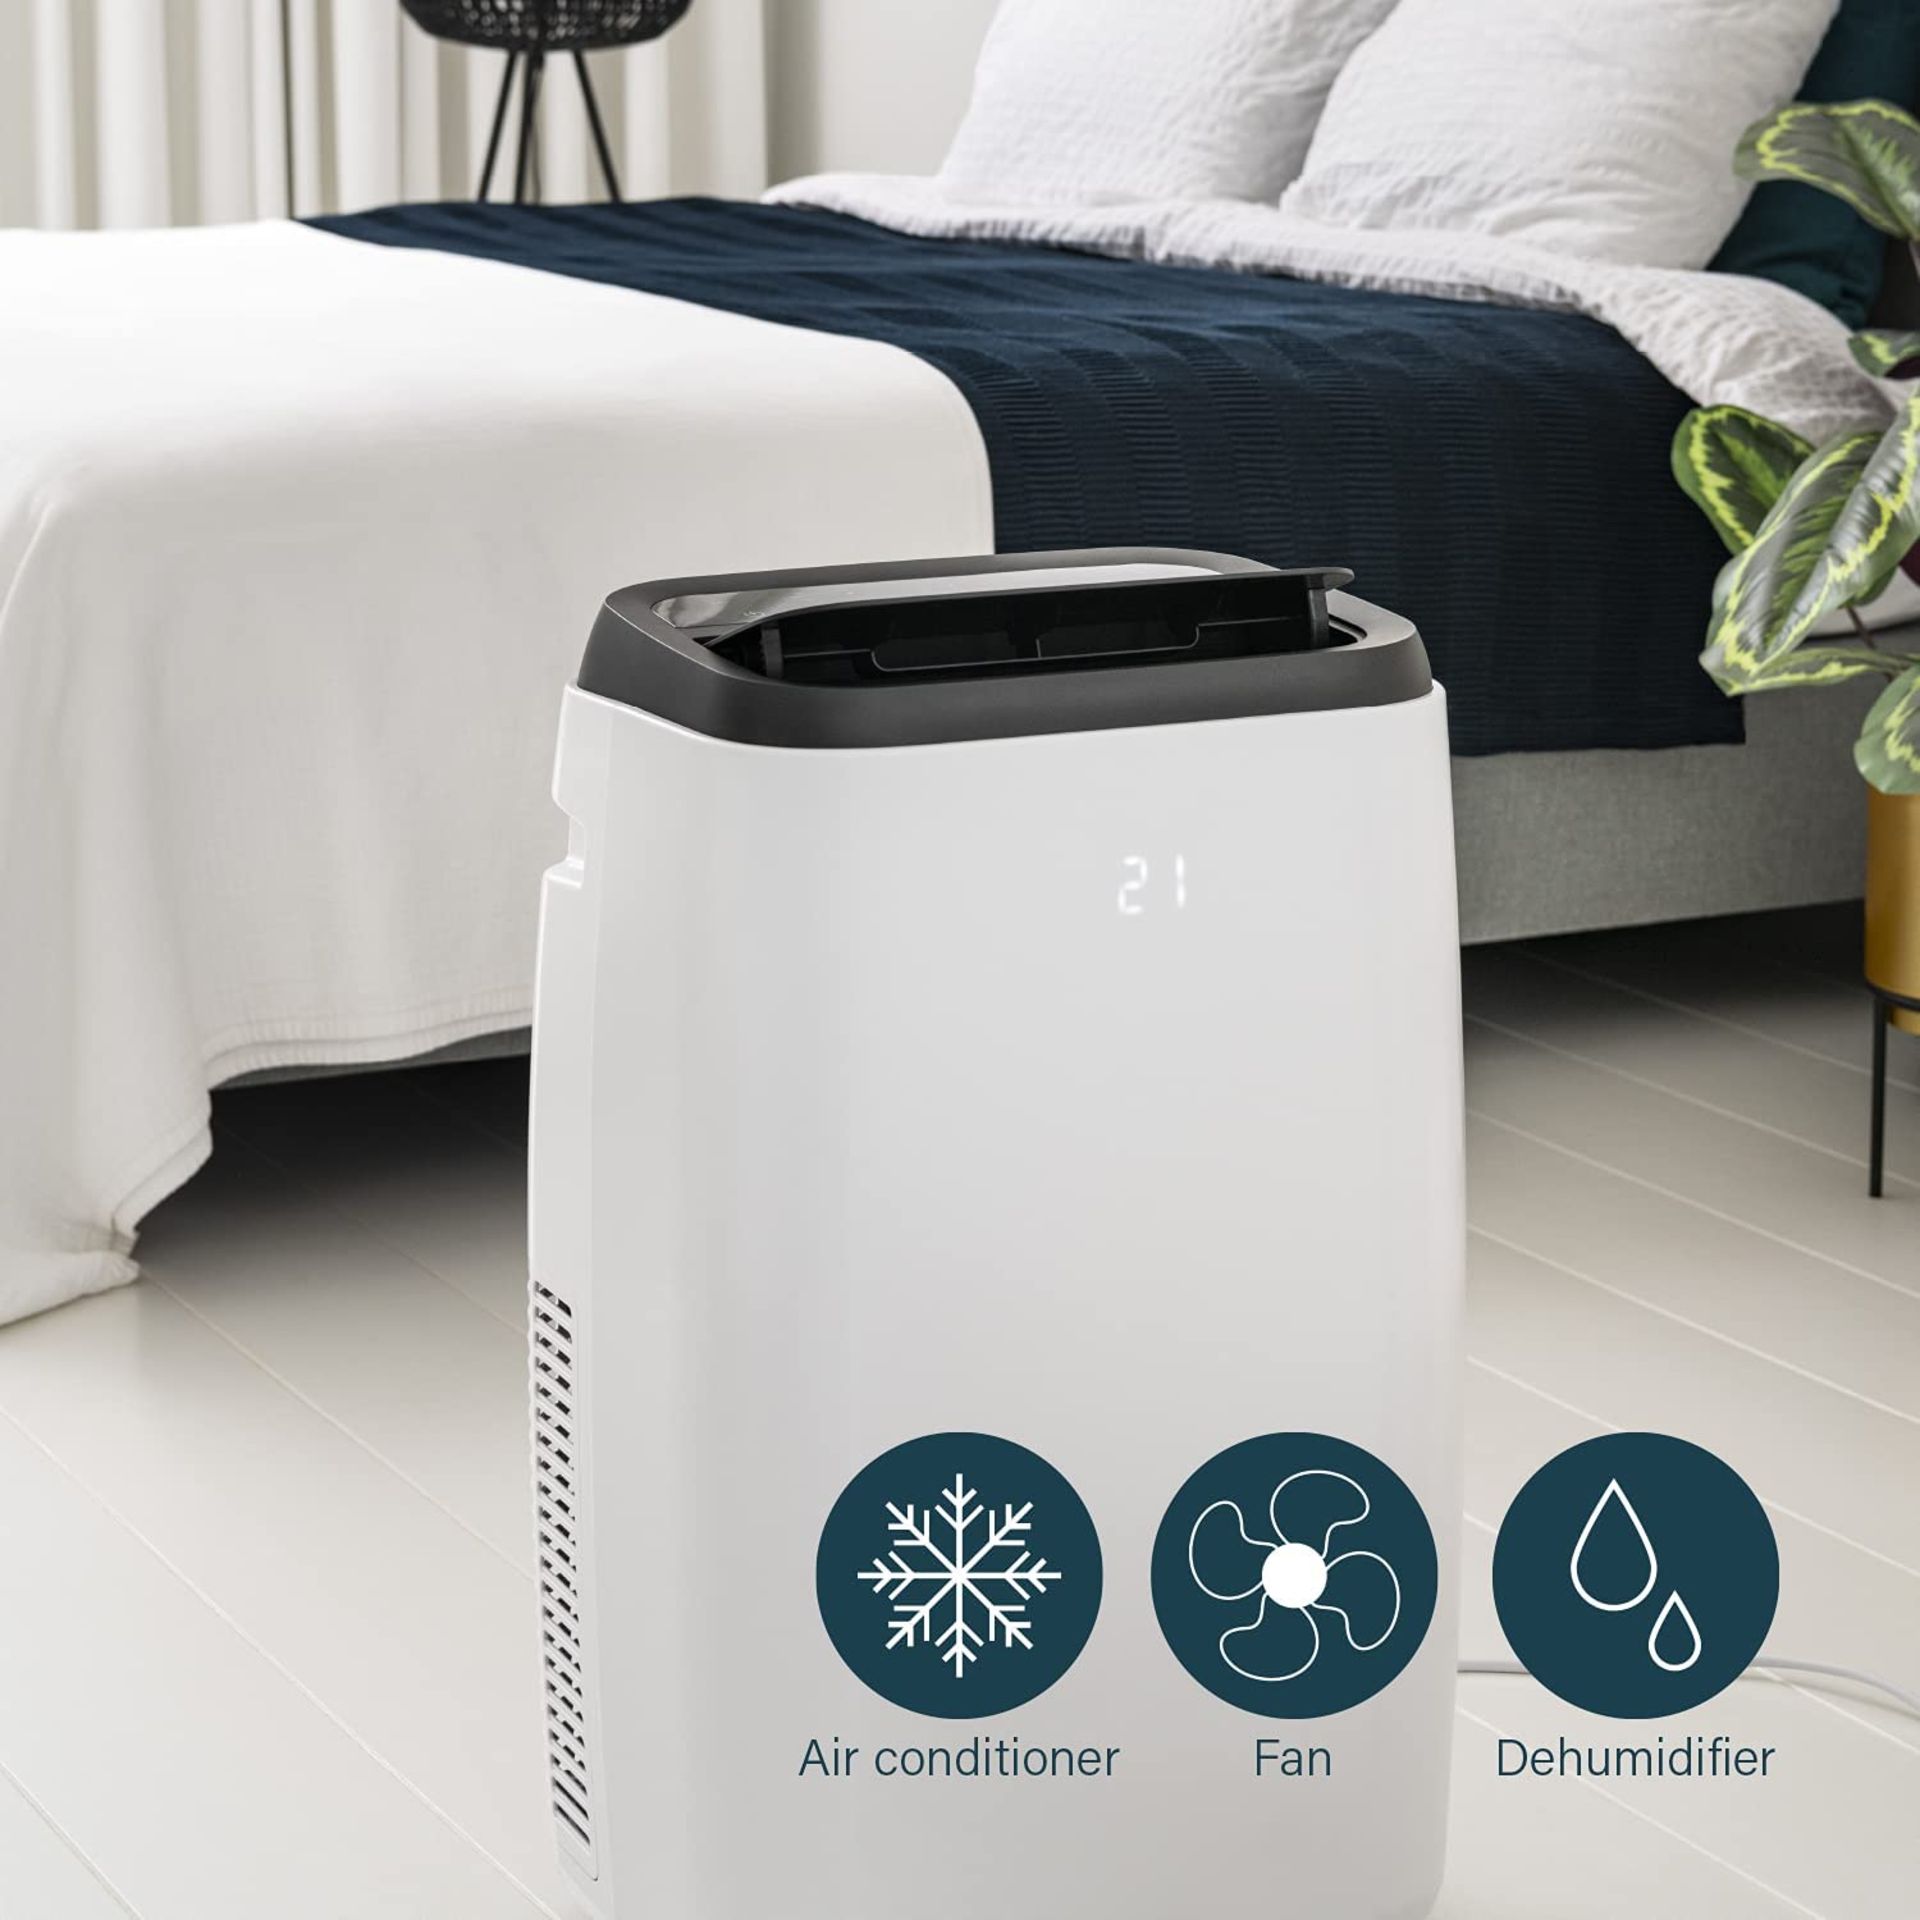 Princess Mobile Air Conditioner, 9000 BTU, Smart and Voice Control, 2,6 kW, Easy Steer Wheels, - Image 2 of 2